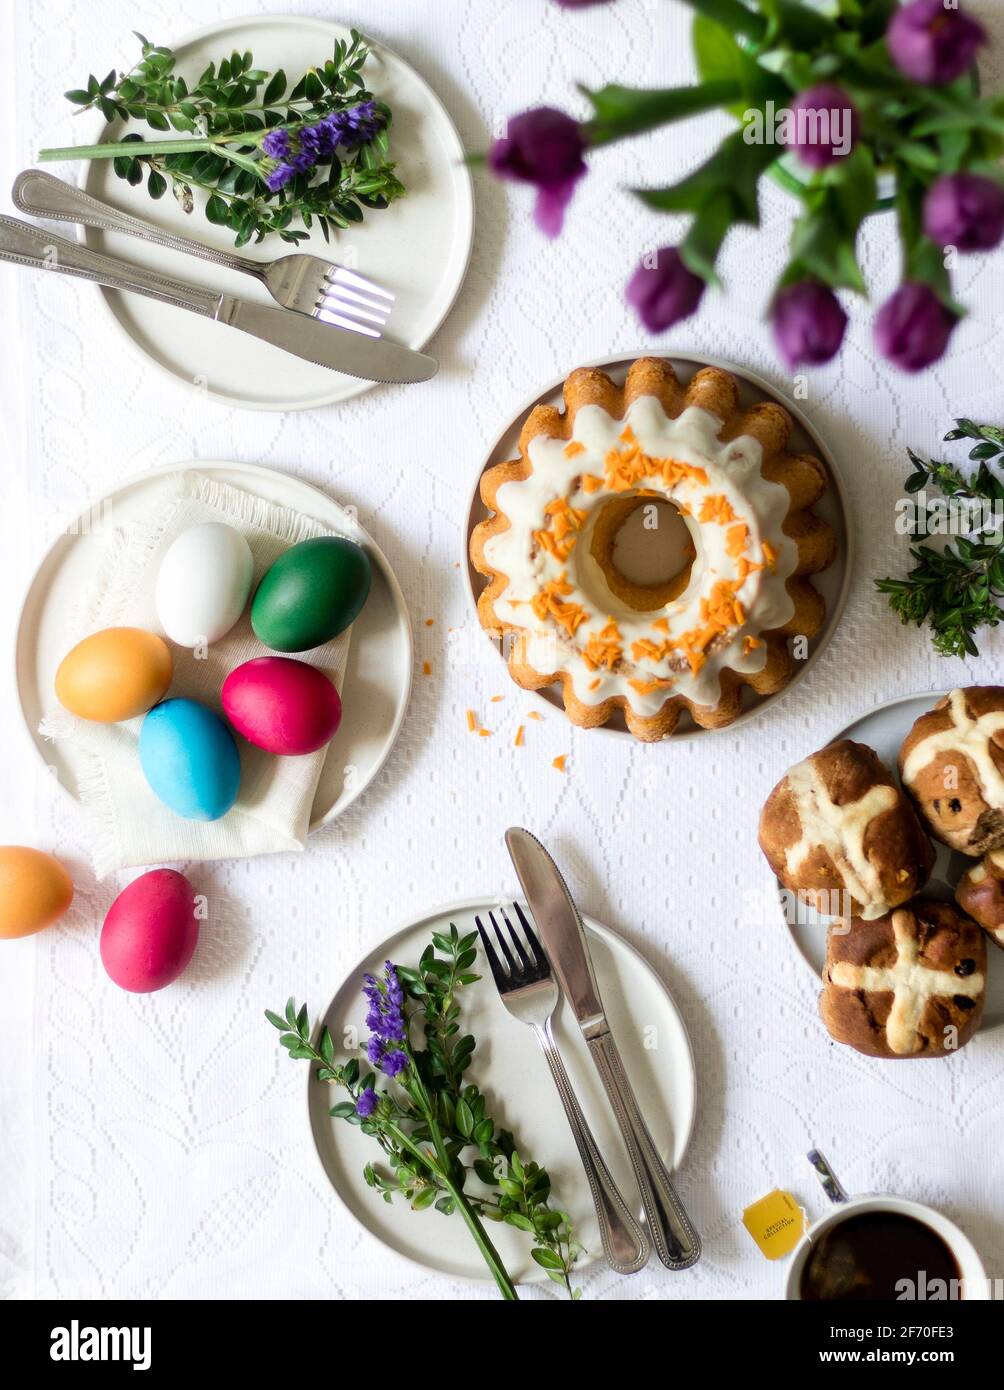 Easter morning breakfast scene - kitchen table with hand painted easter eggs, traditional Easter babka, hot cross buns, freshly made tea, tulilps. Stock Photo